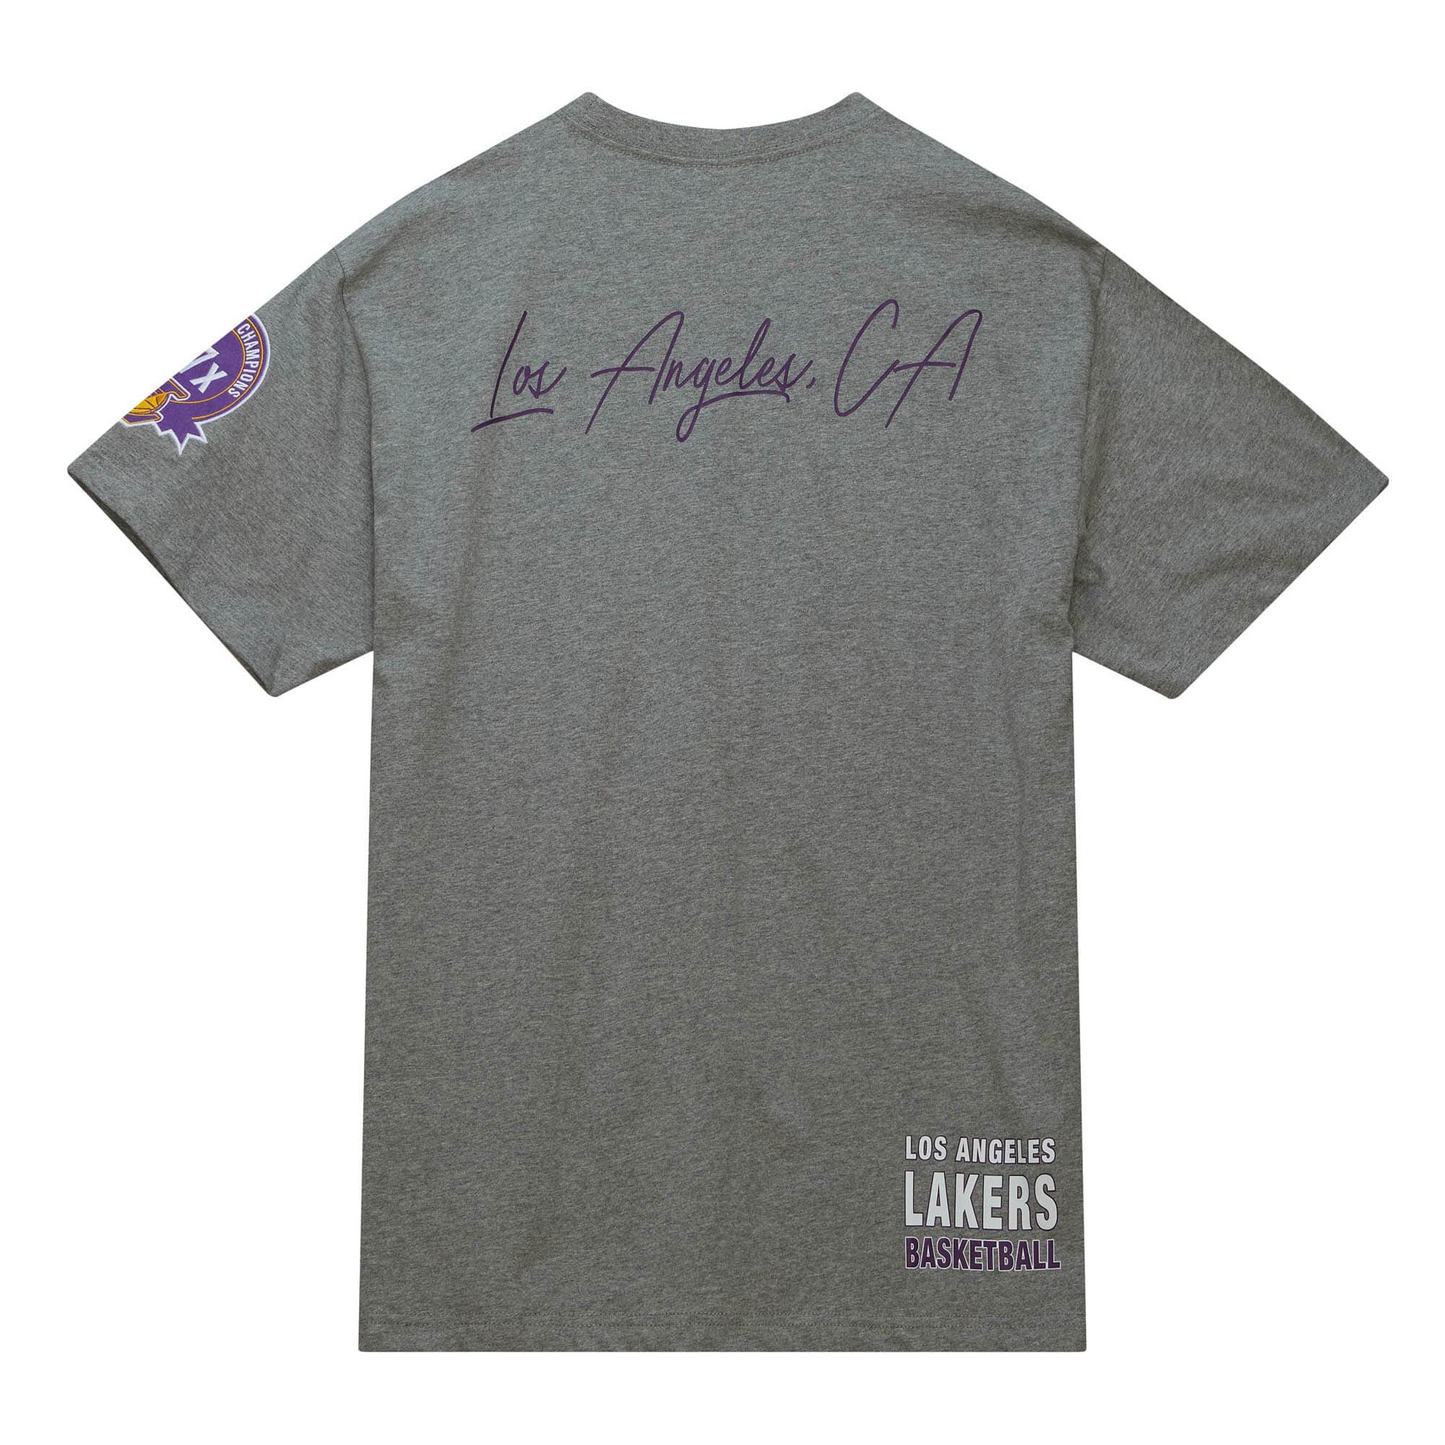 LOS ANGELES LAKERS MEN'S CITY COLLECTION T-SHIRT